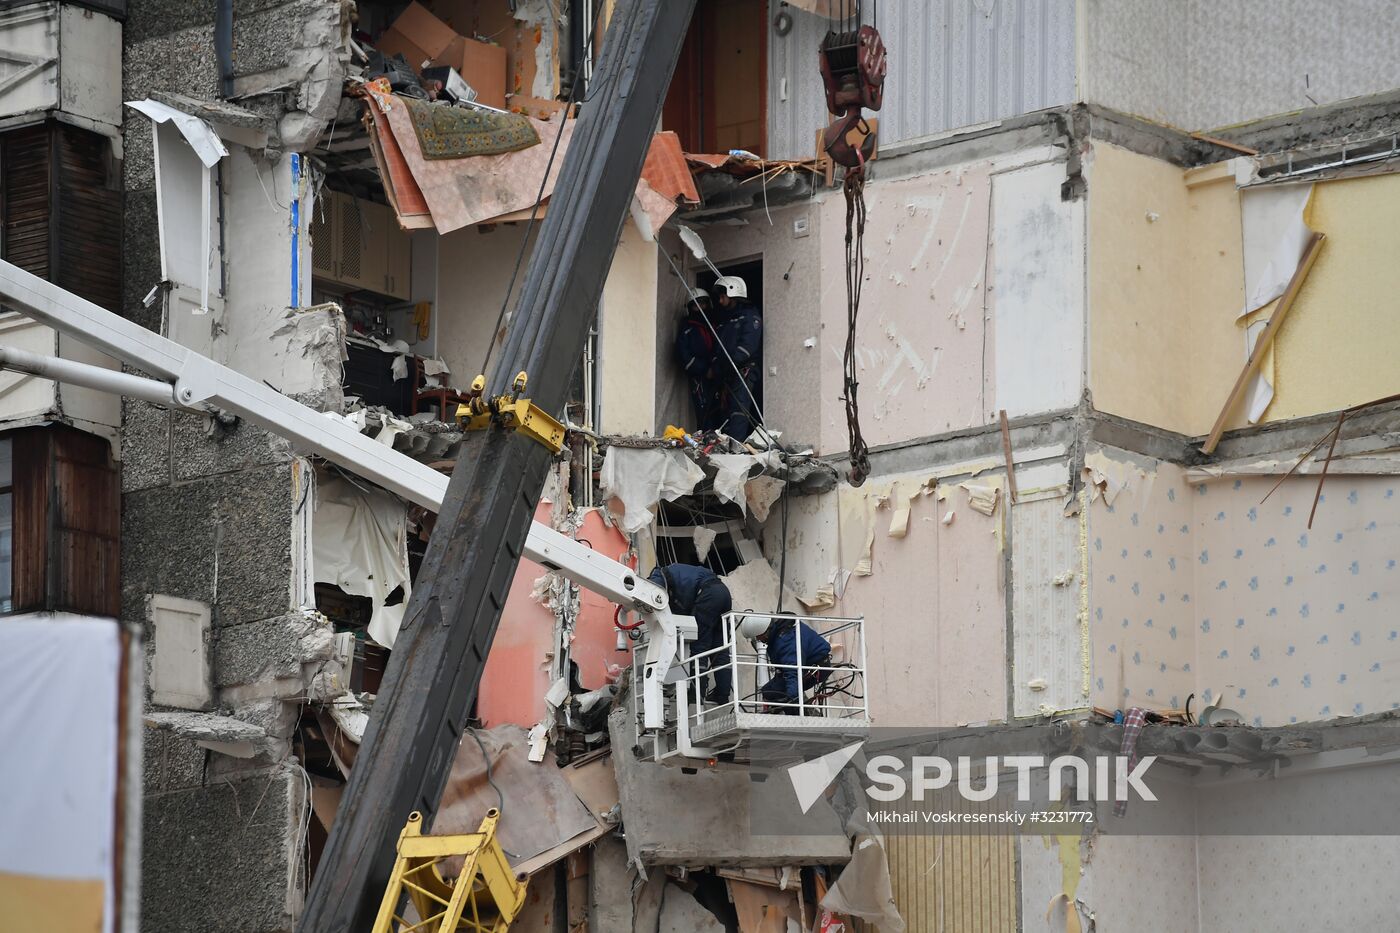 Aftermath of apartment house collapse in Izhevsk